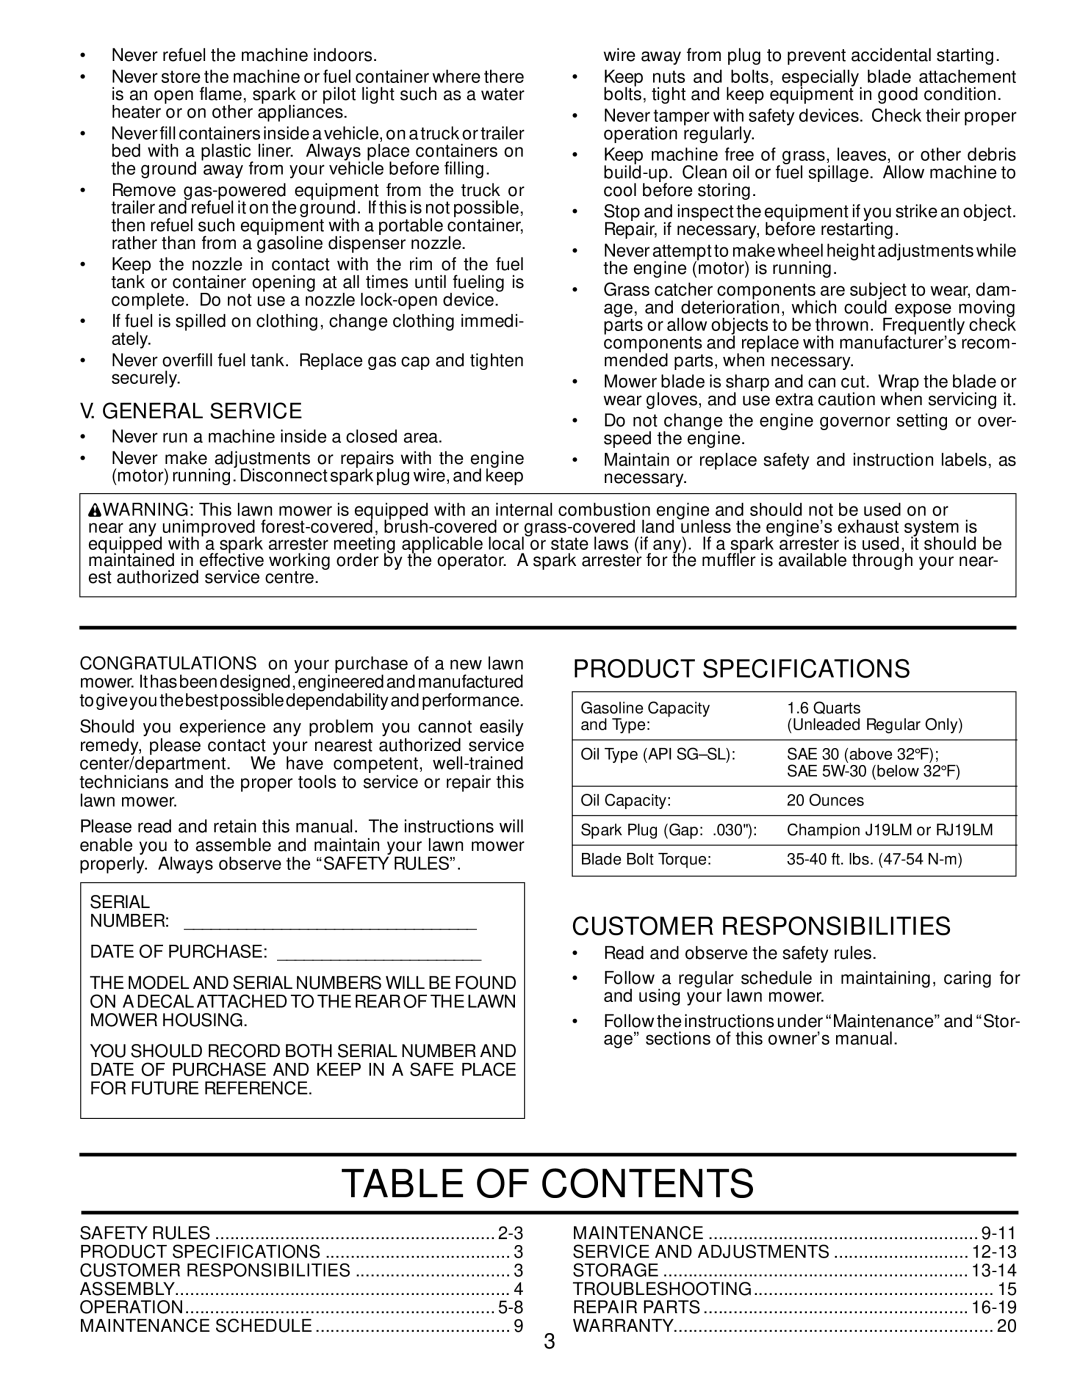 Husqvarna 532424698 Table Of Contents, Product Specifications, Customer Responsibilities, V. General Service, 9-11, 12-13 